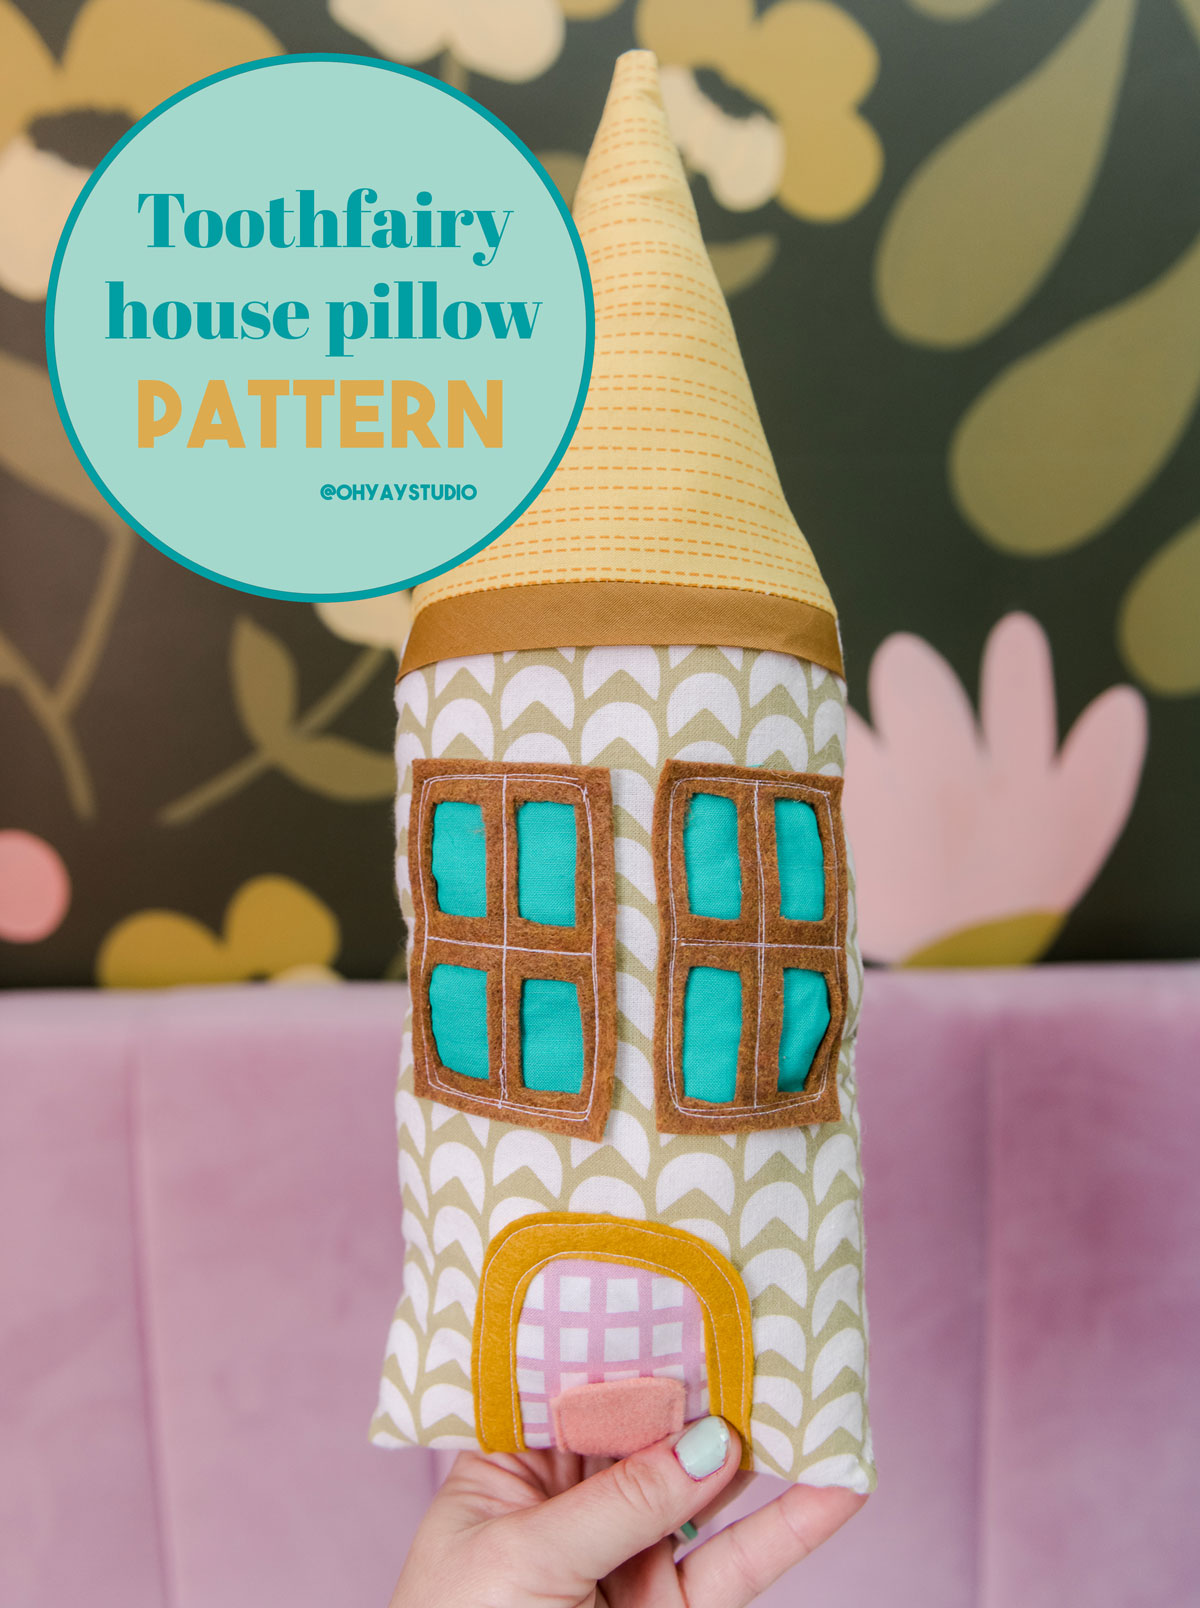 Tooth fairy pillow, house pillow pattern, how to sew a house pillow, tooth fairy pillow DIY, DIY tooth fairy pillows, janome sewing machine